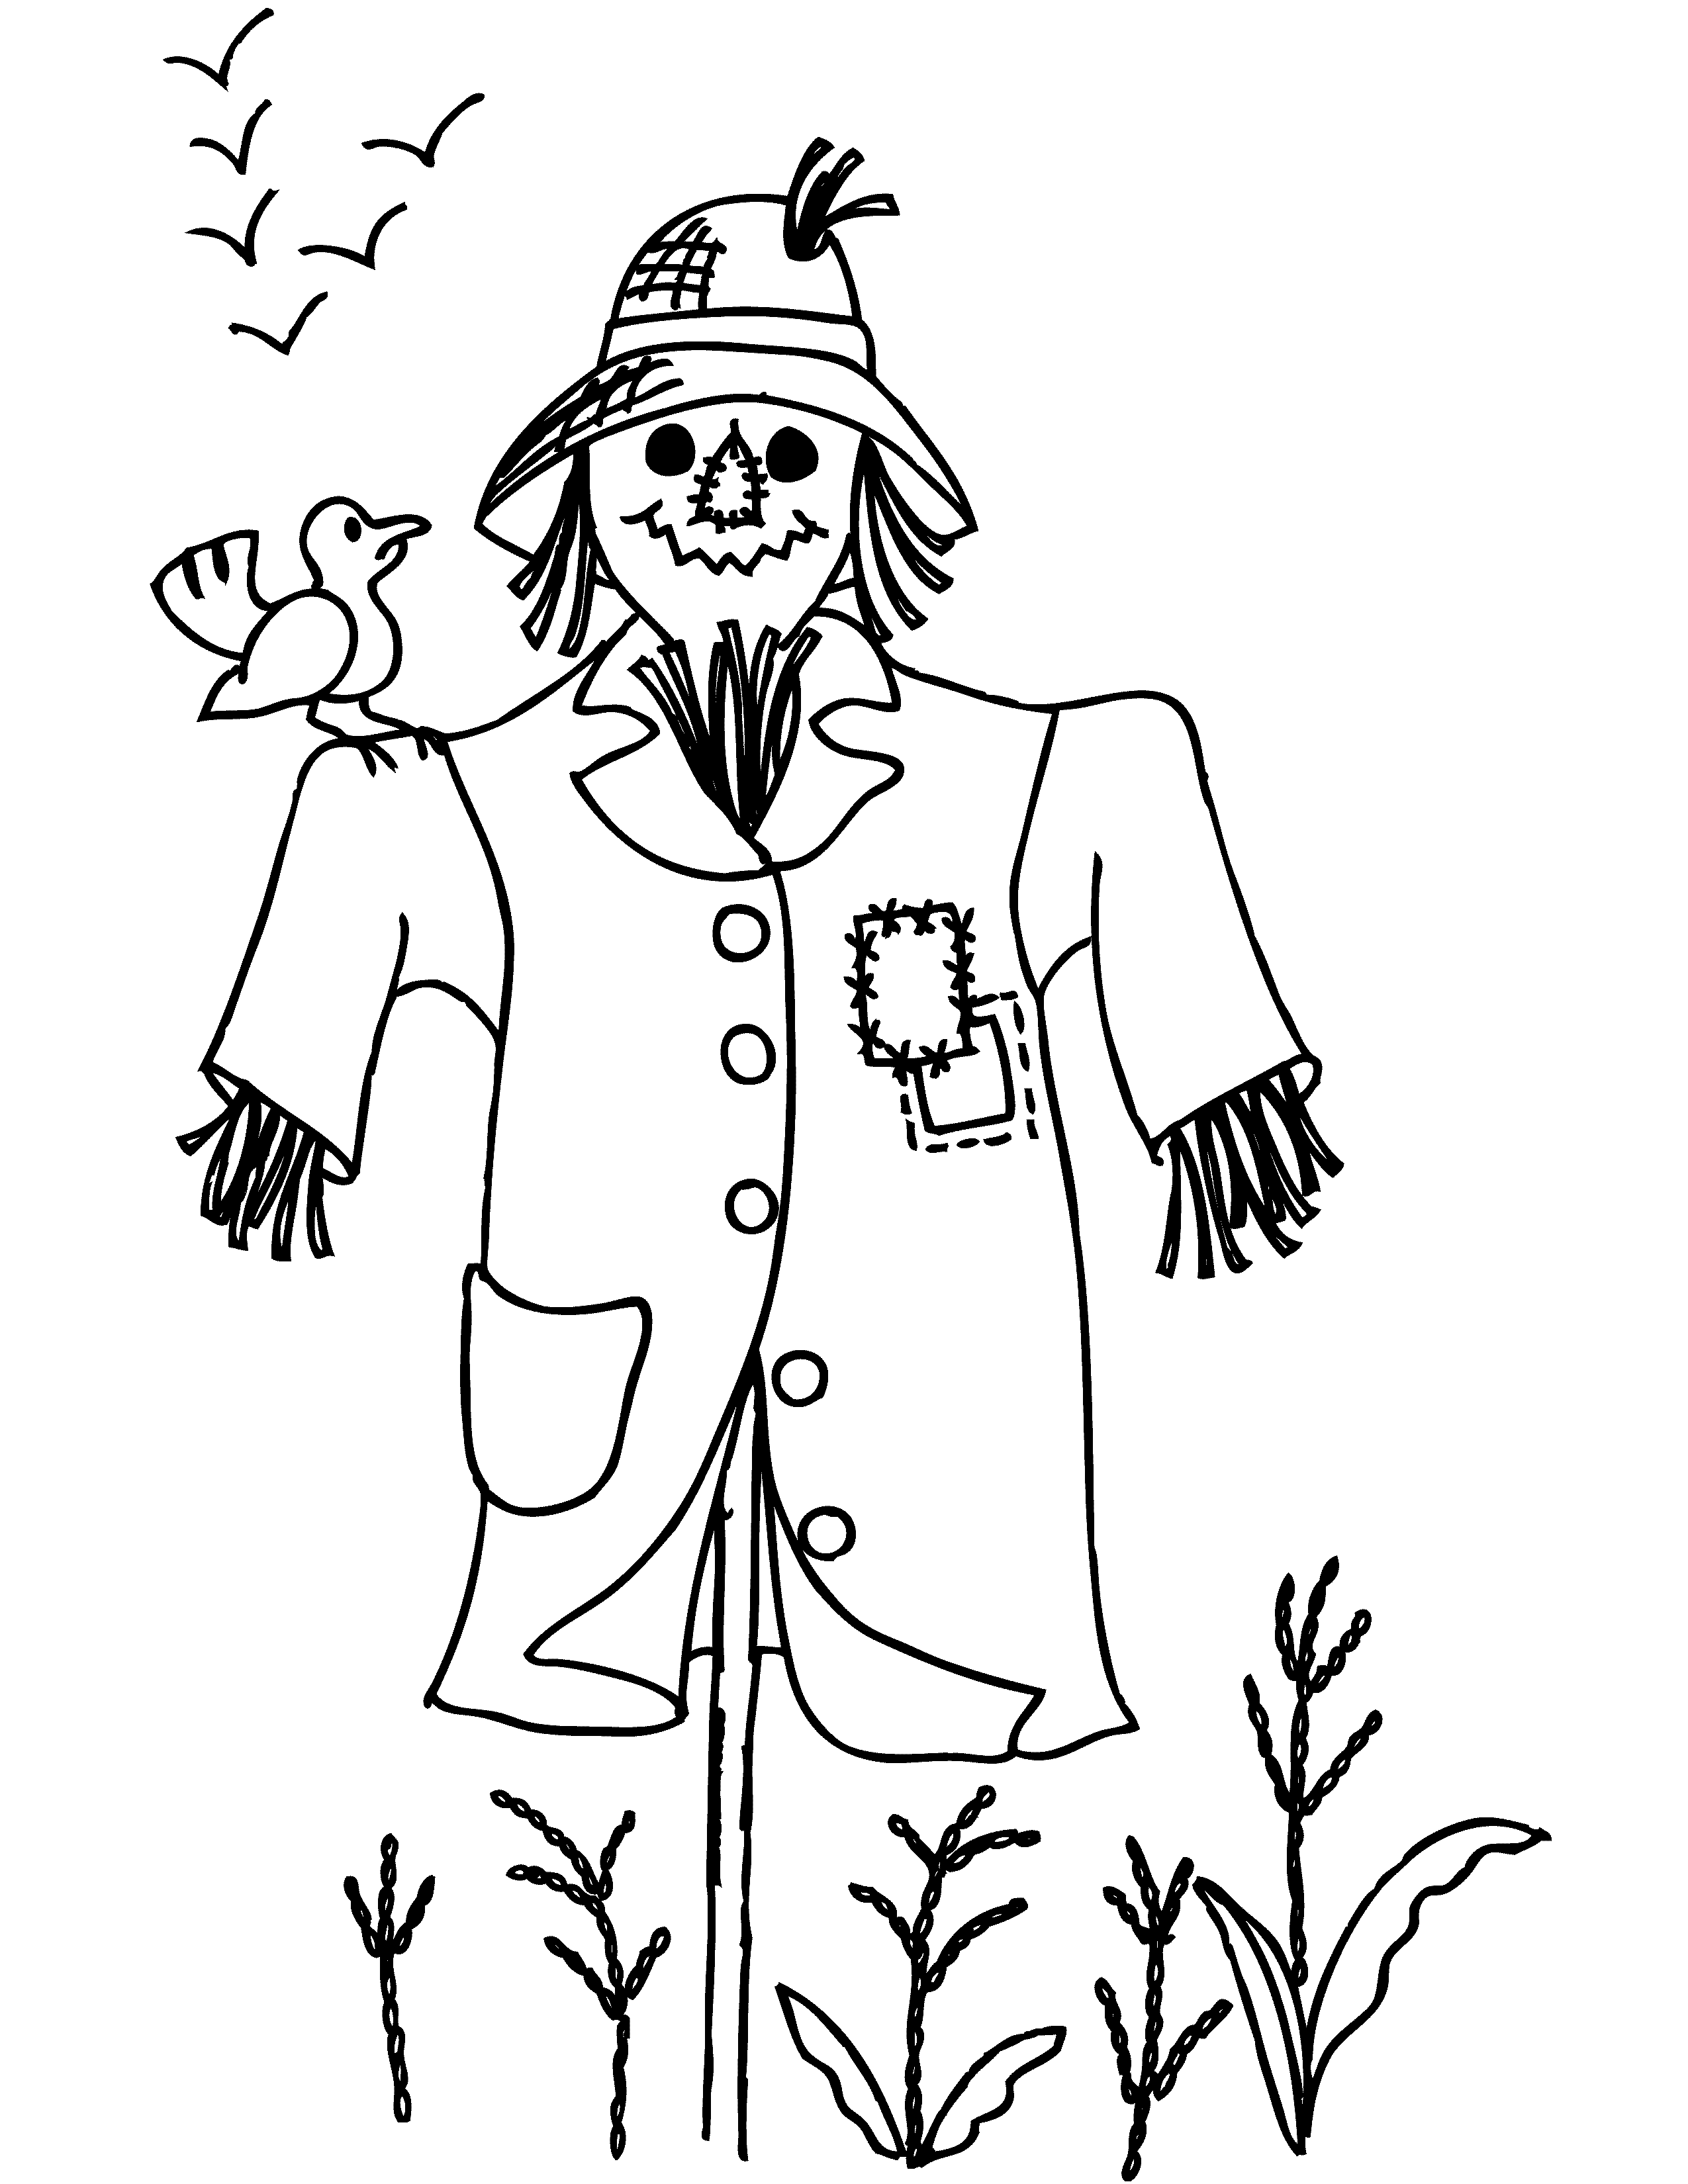 Scarecrow Patterns Coloring Pages Scarecrow Coloring Pages Lego ...